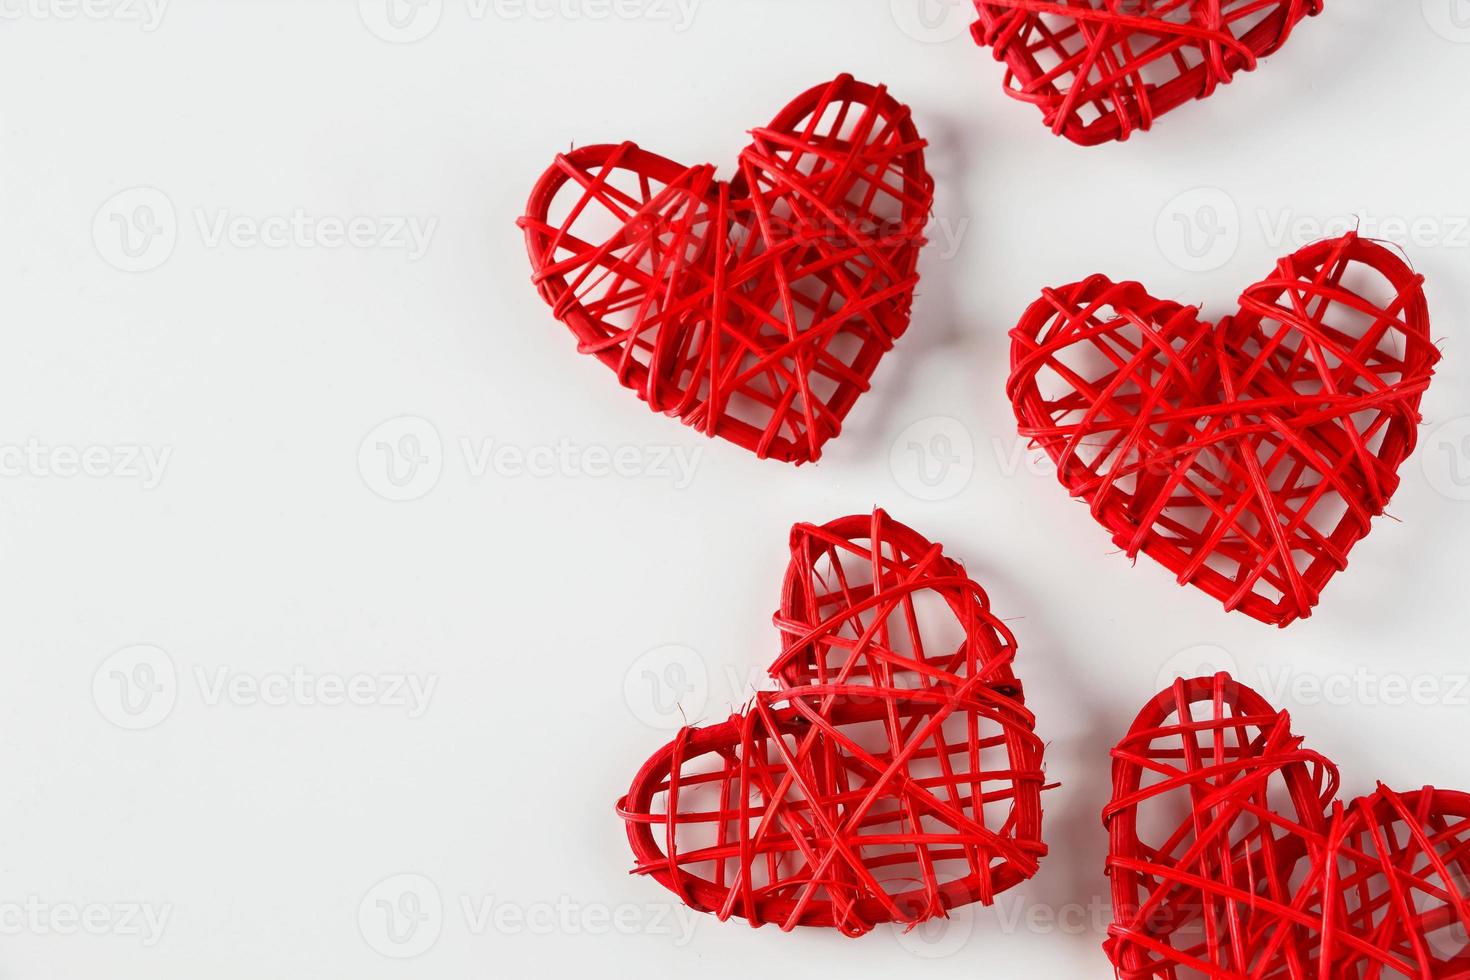 Red handmade hearts made of twigs on a white background photo